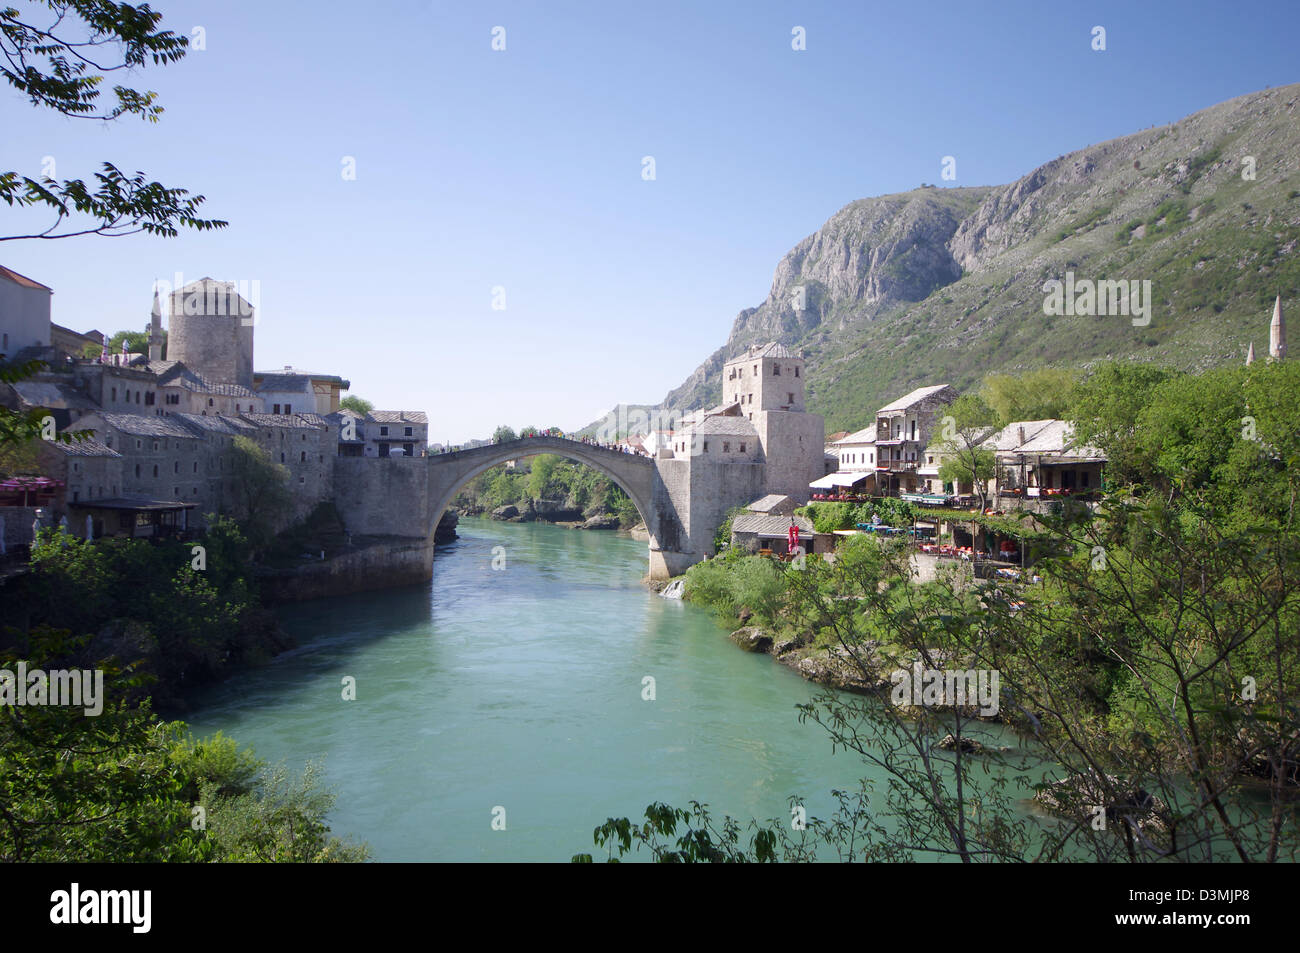 Old Bridge - built 16Th century in Mostar, Bosnia and Herzegovina. Crosses the river Neretva connects Moslems and Christians Stock Photo